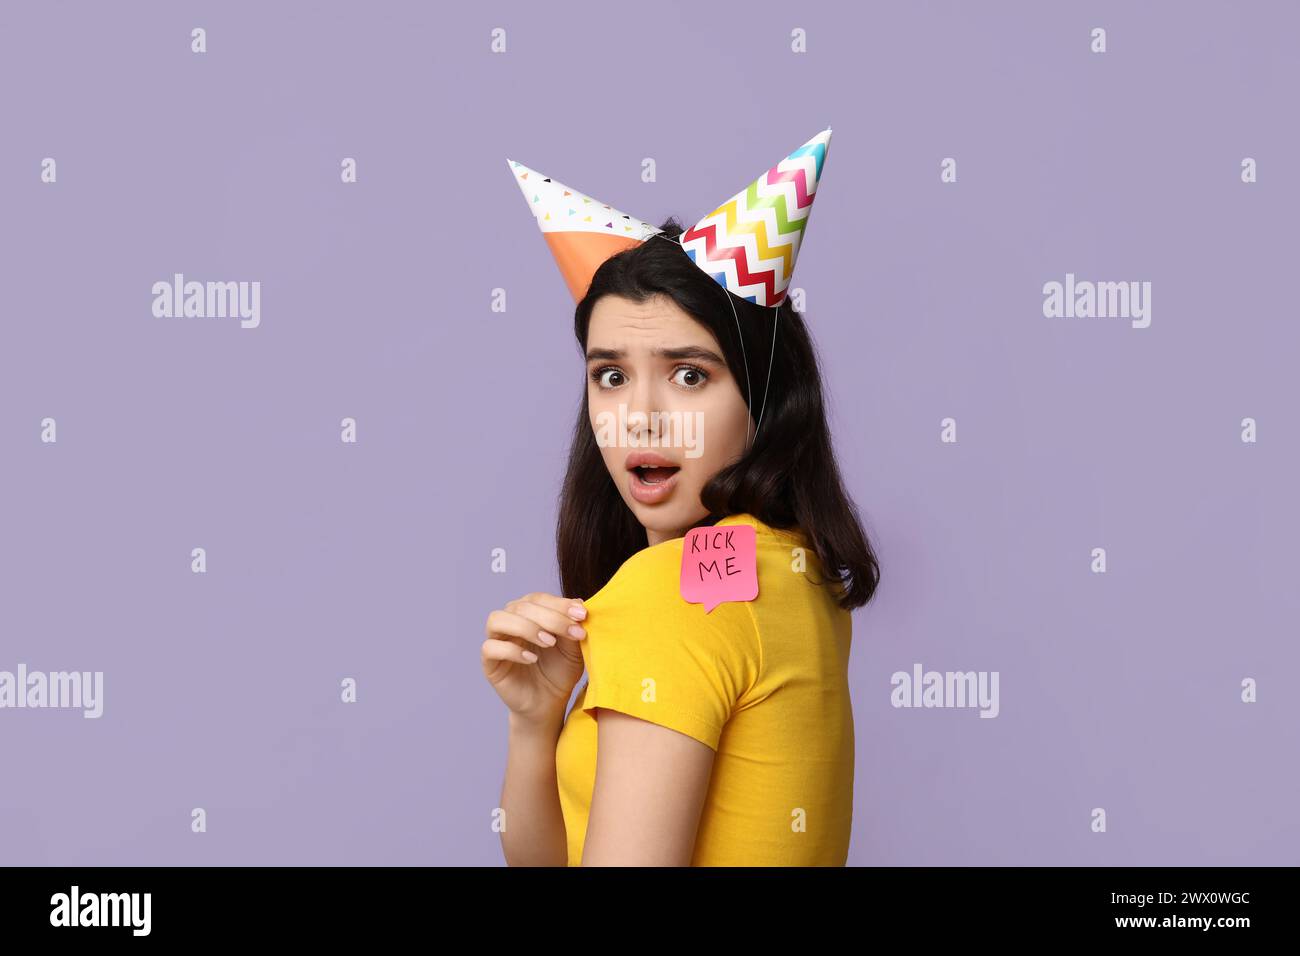 Beautiful young shocked woman with paper sticker attached to her back on purple background. April fool's day celebration Stock Photo